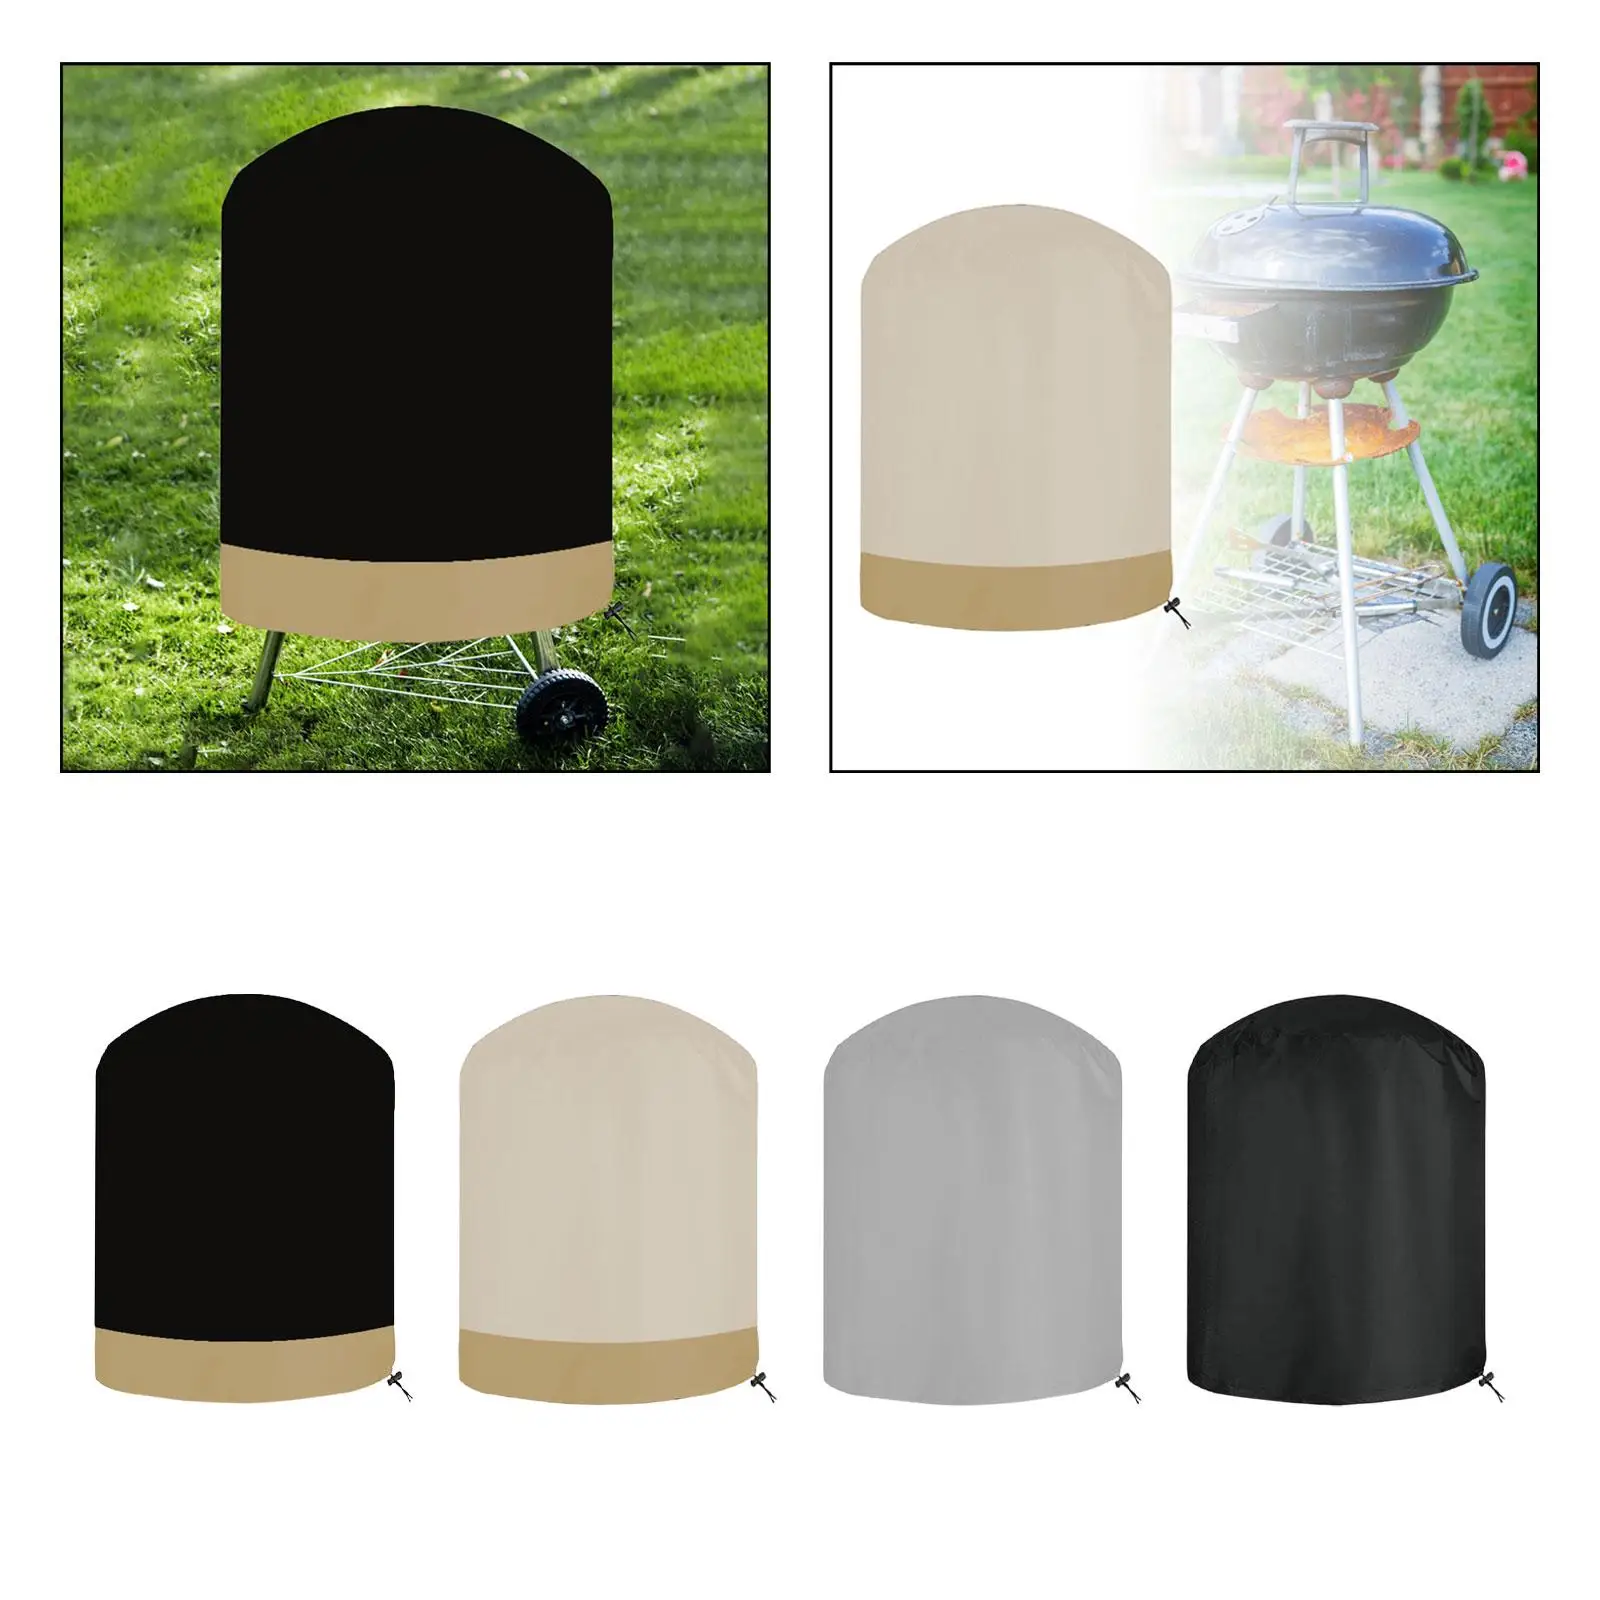 Grill Cover Outdoor Grill Durable Water Resistant Protective Cover Gas Grill Covers for Travel Picnic Garden Barbecue